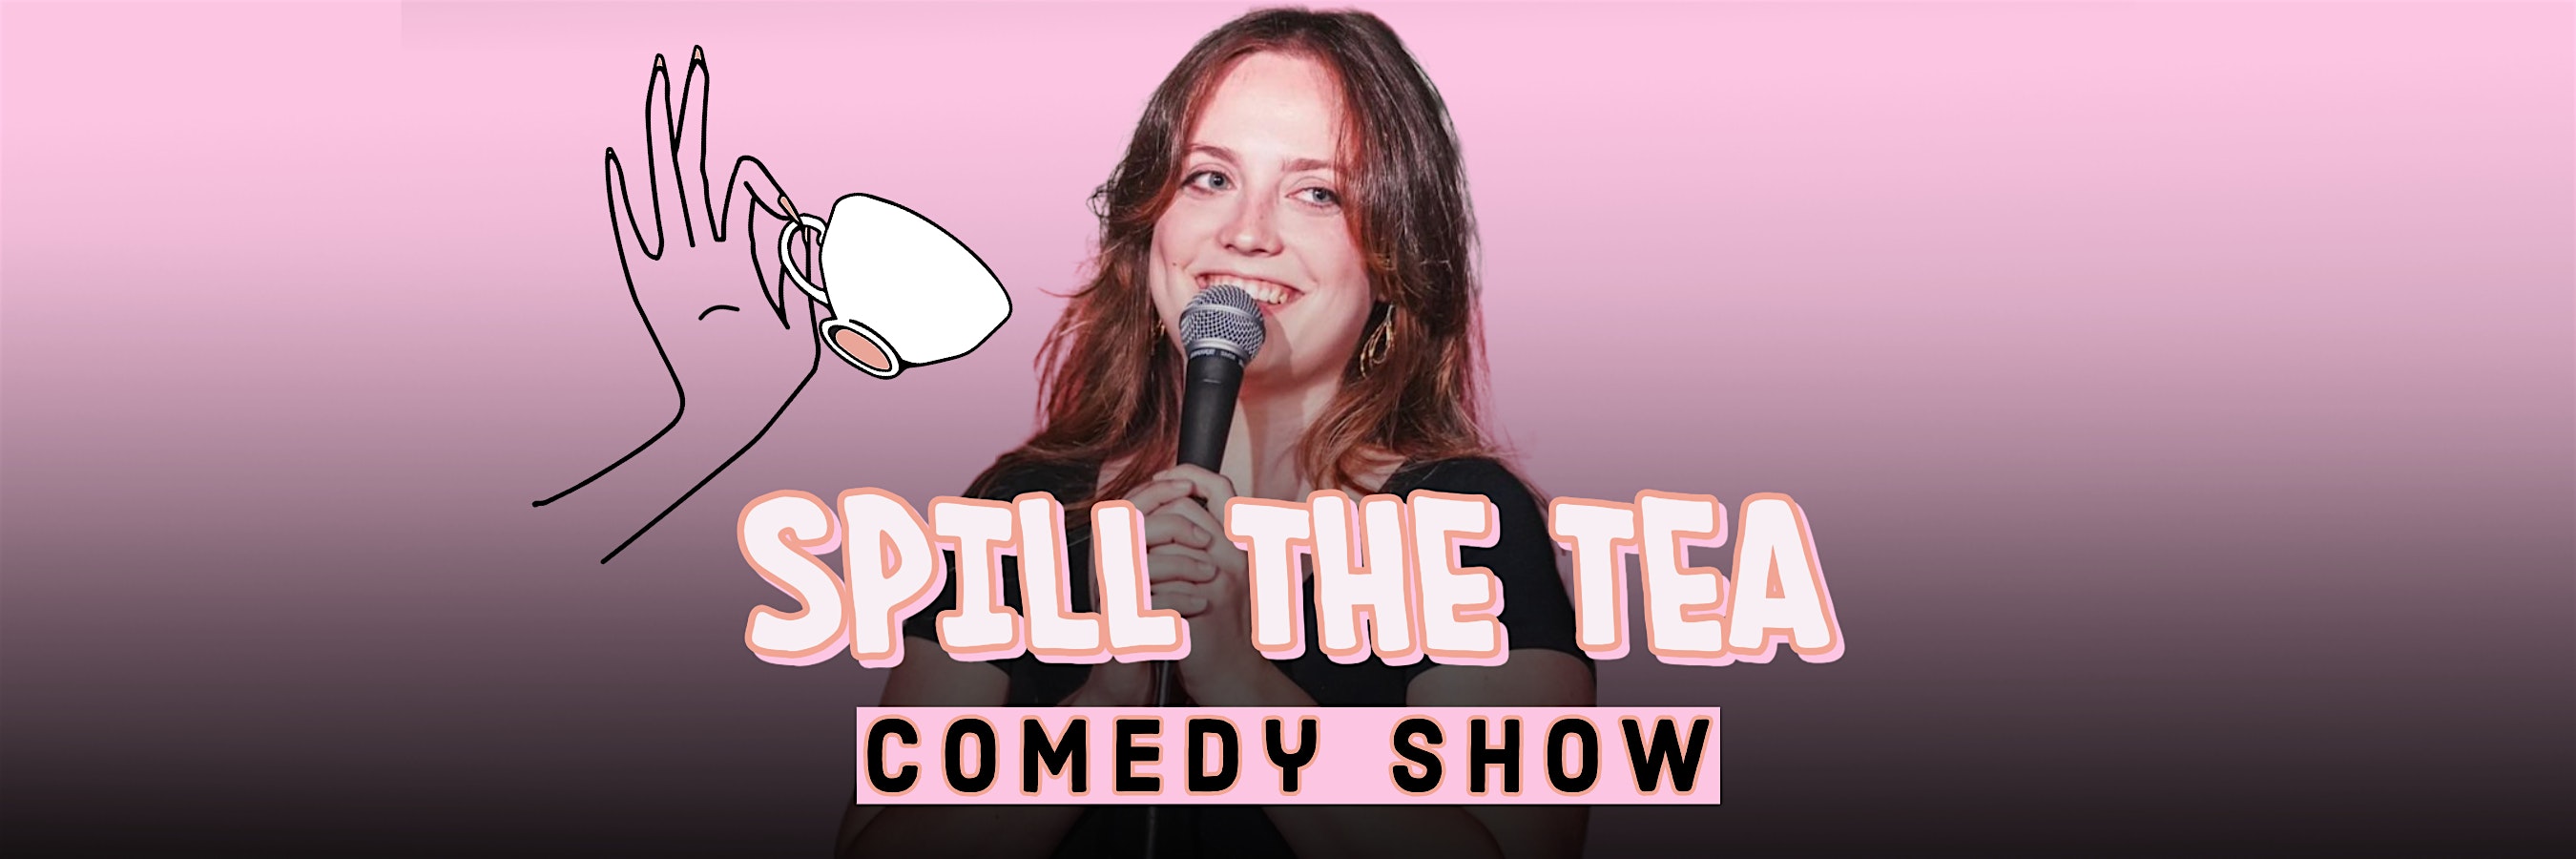 The Riot presents Sunday Night Standup Comedy "Spill The Tea"